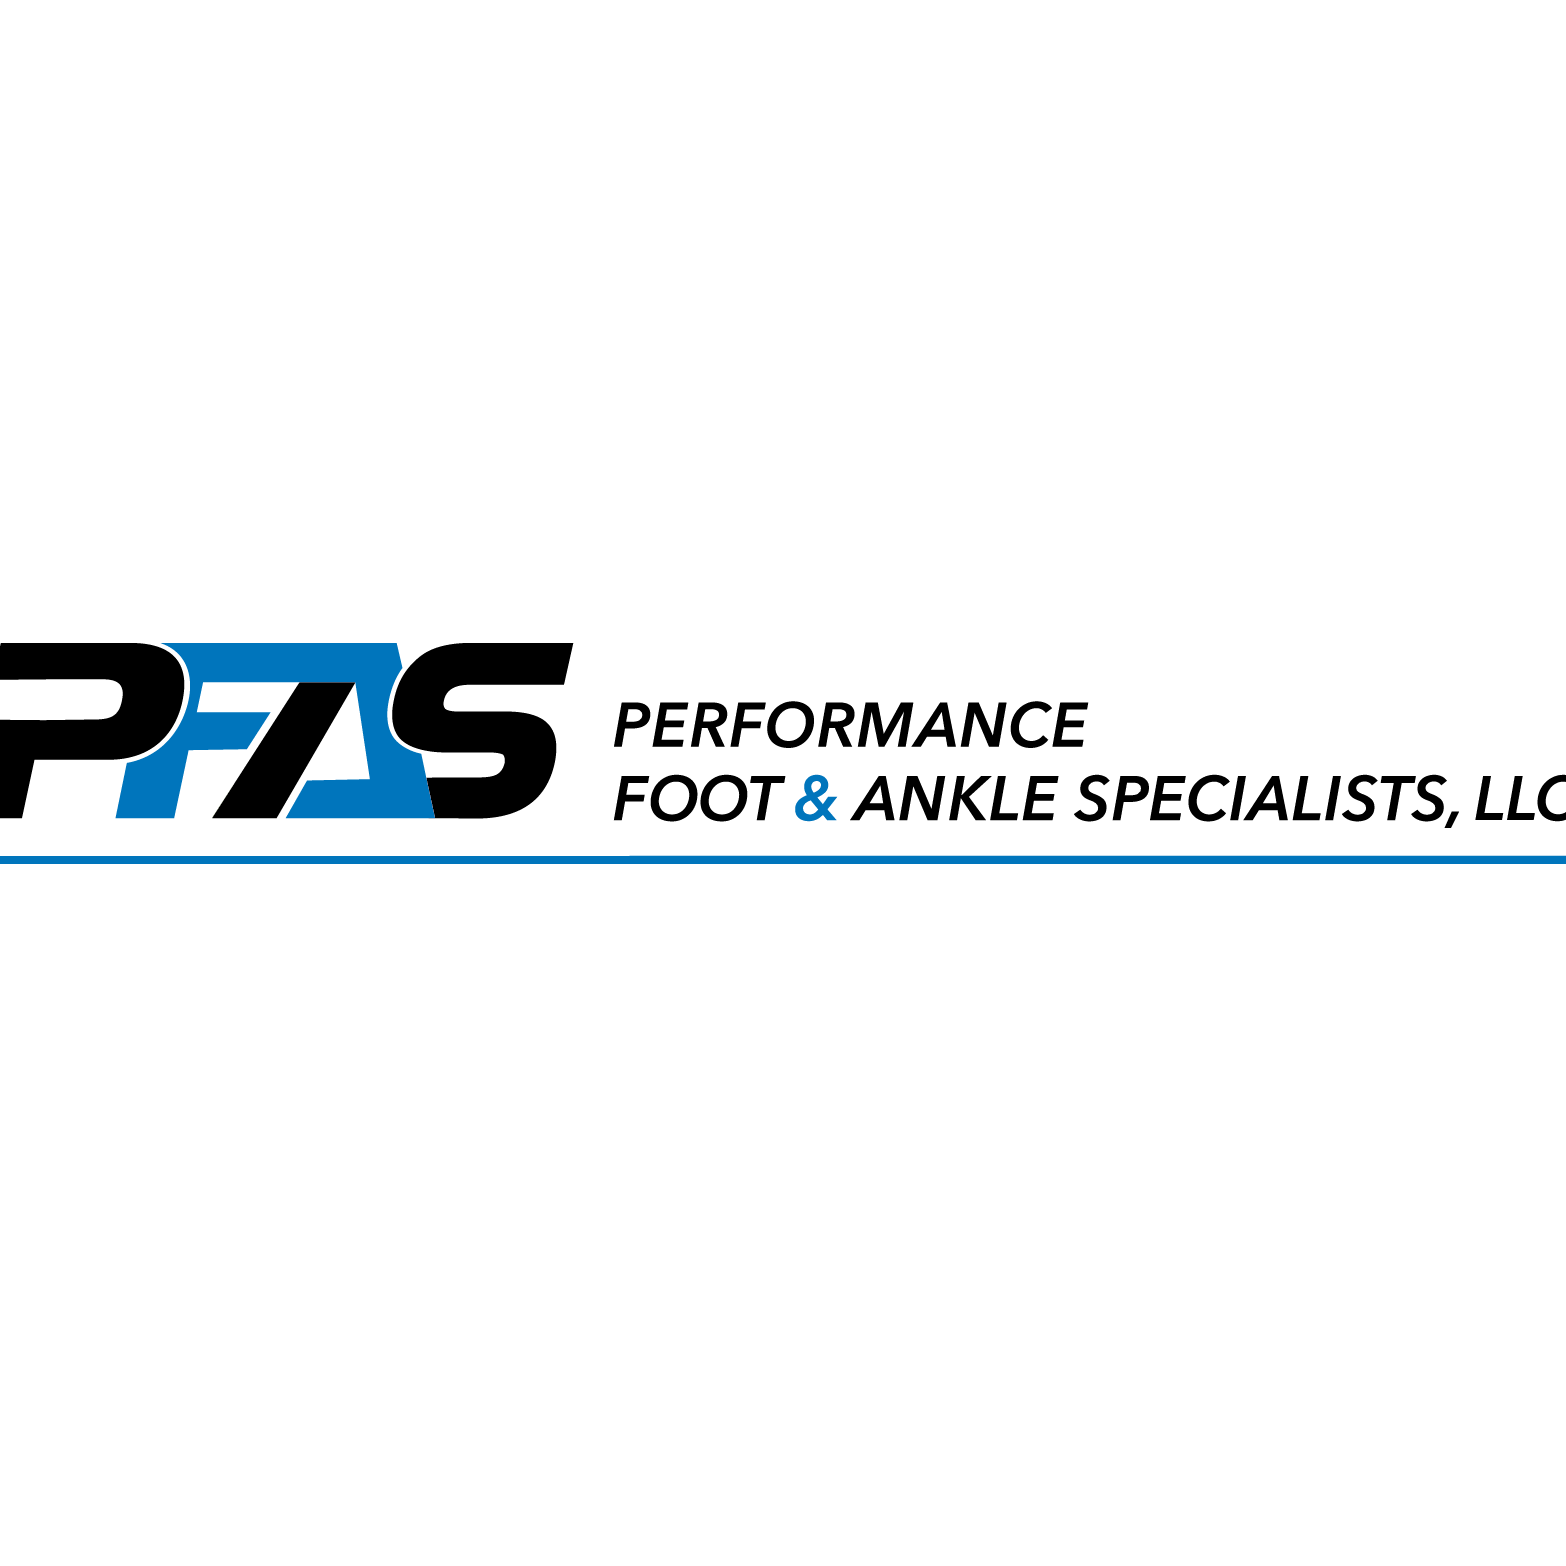 Performance Foot & Ankle Specialists, LLC Logo